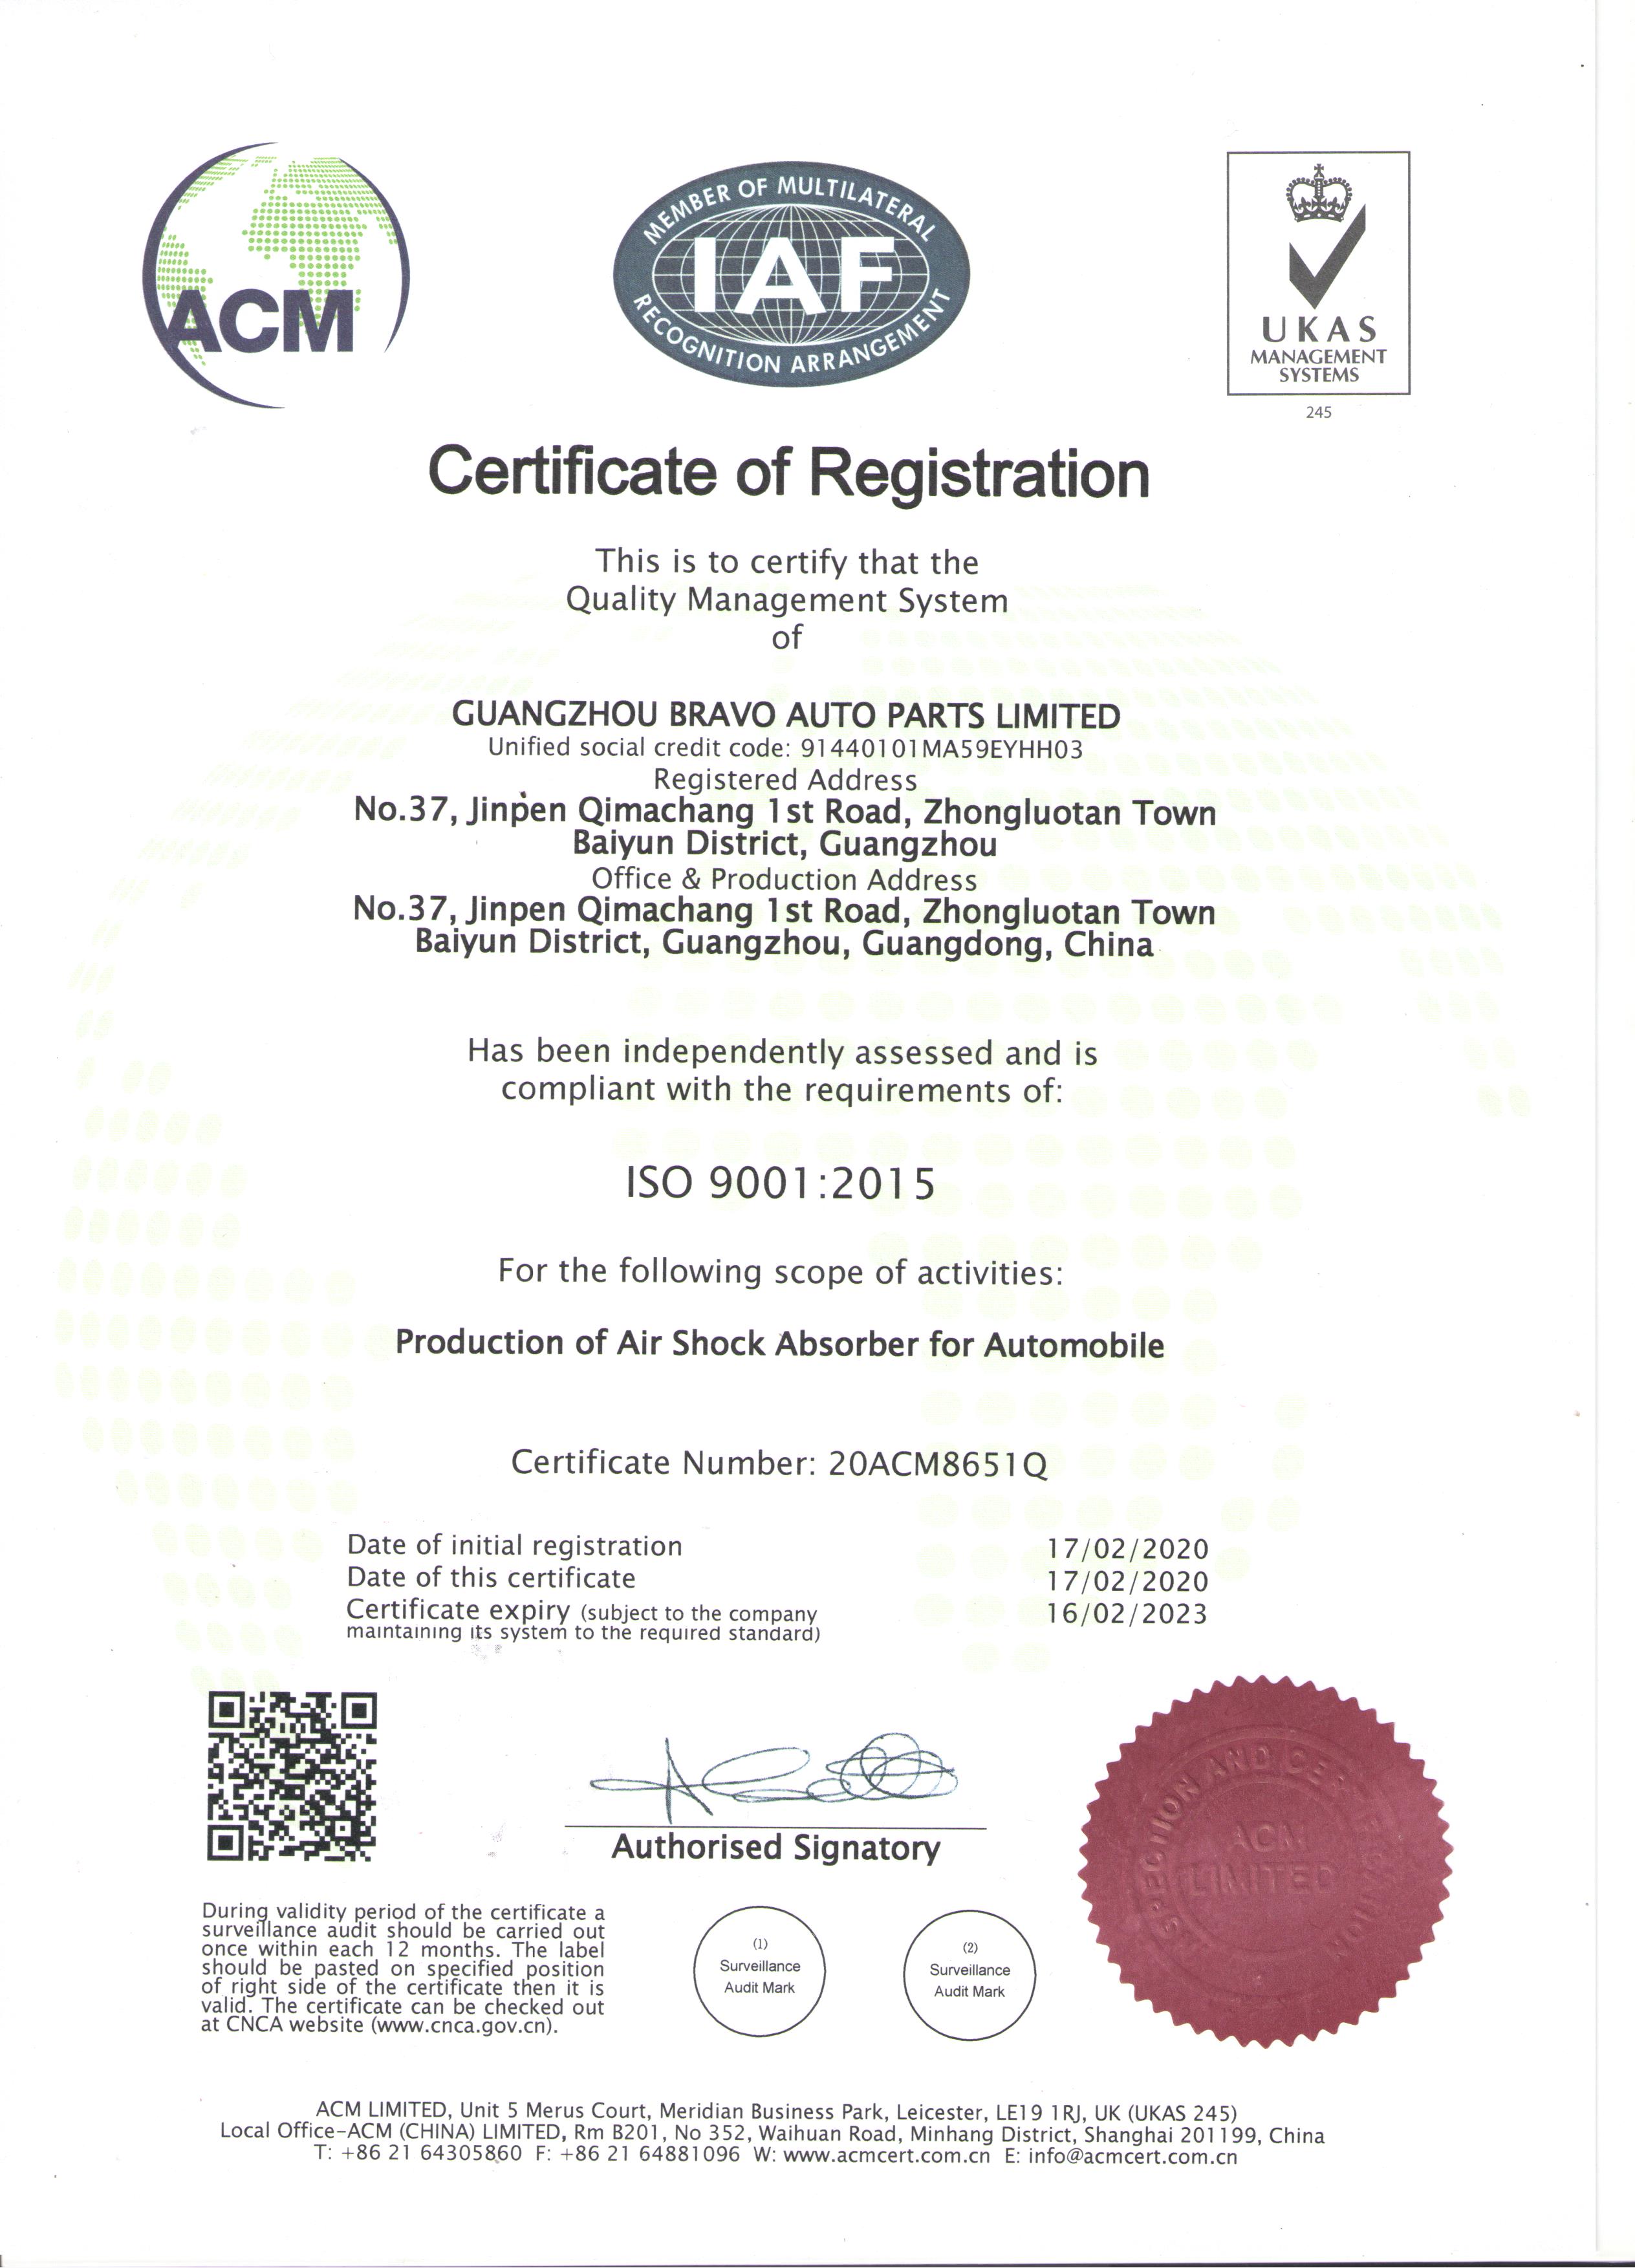 Congratulations that company successfully passed the ISO 9001 certification